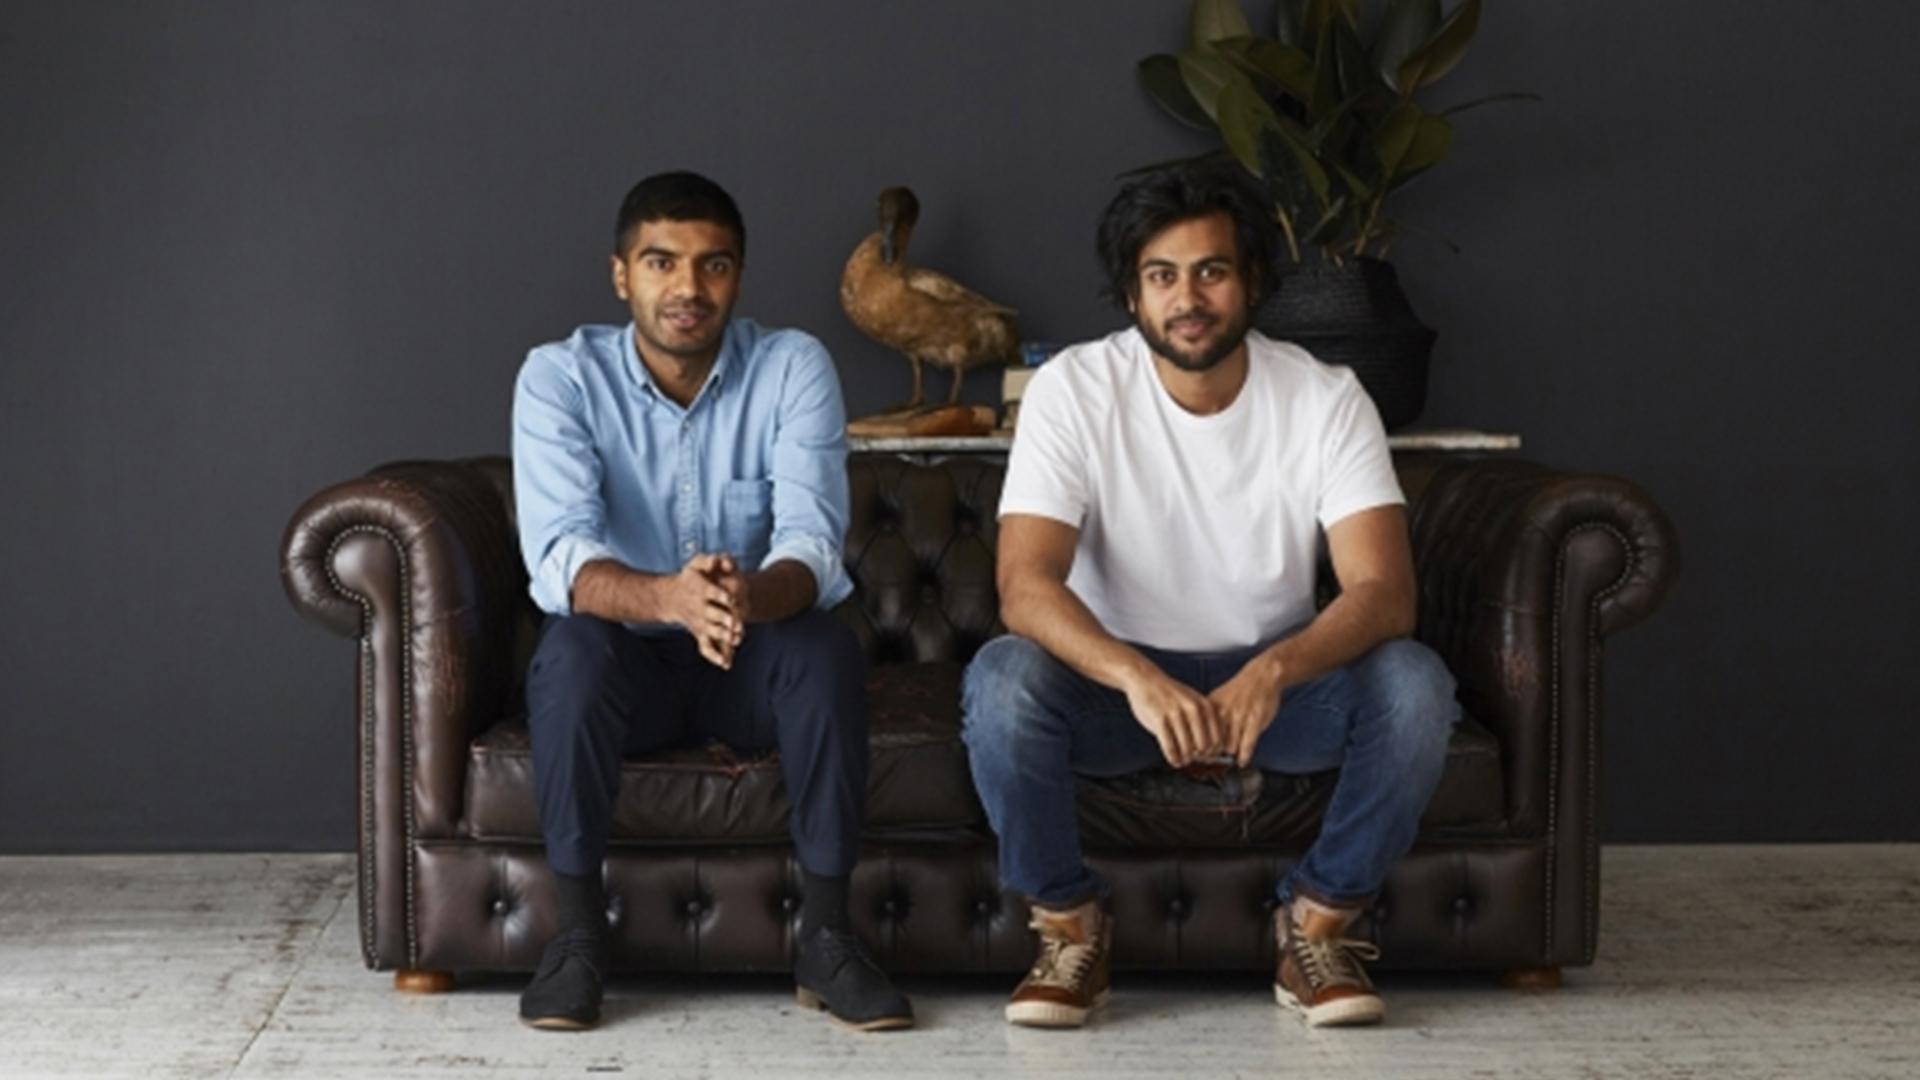 Founders of Sleeping Duck, Winston and Selvan, sitting on a leather couch with a smile.